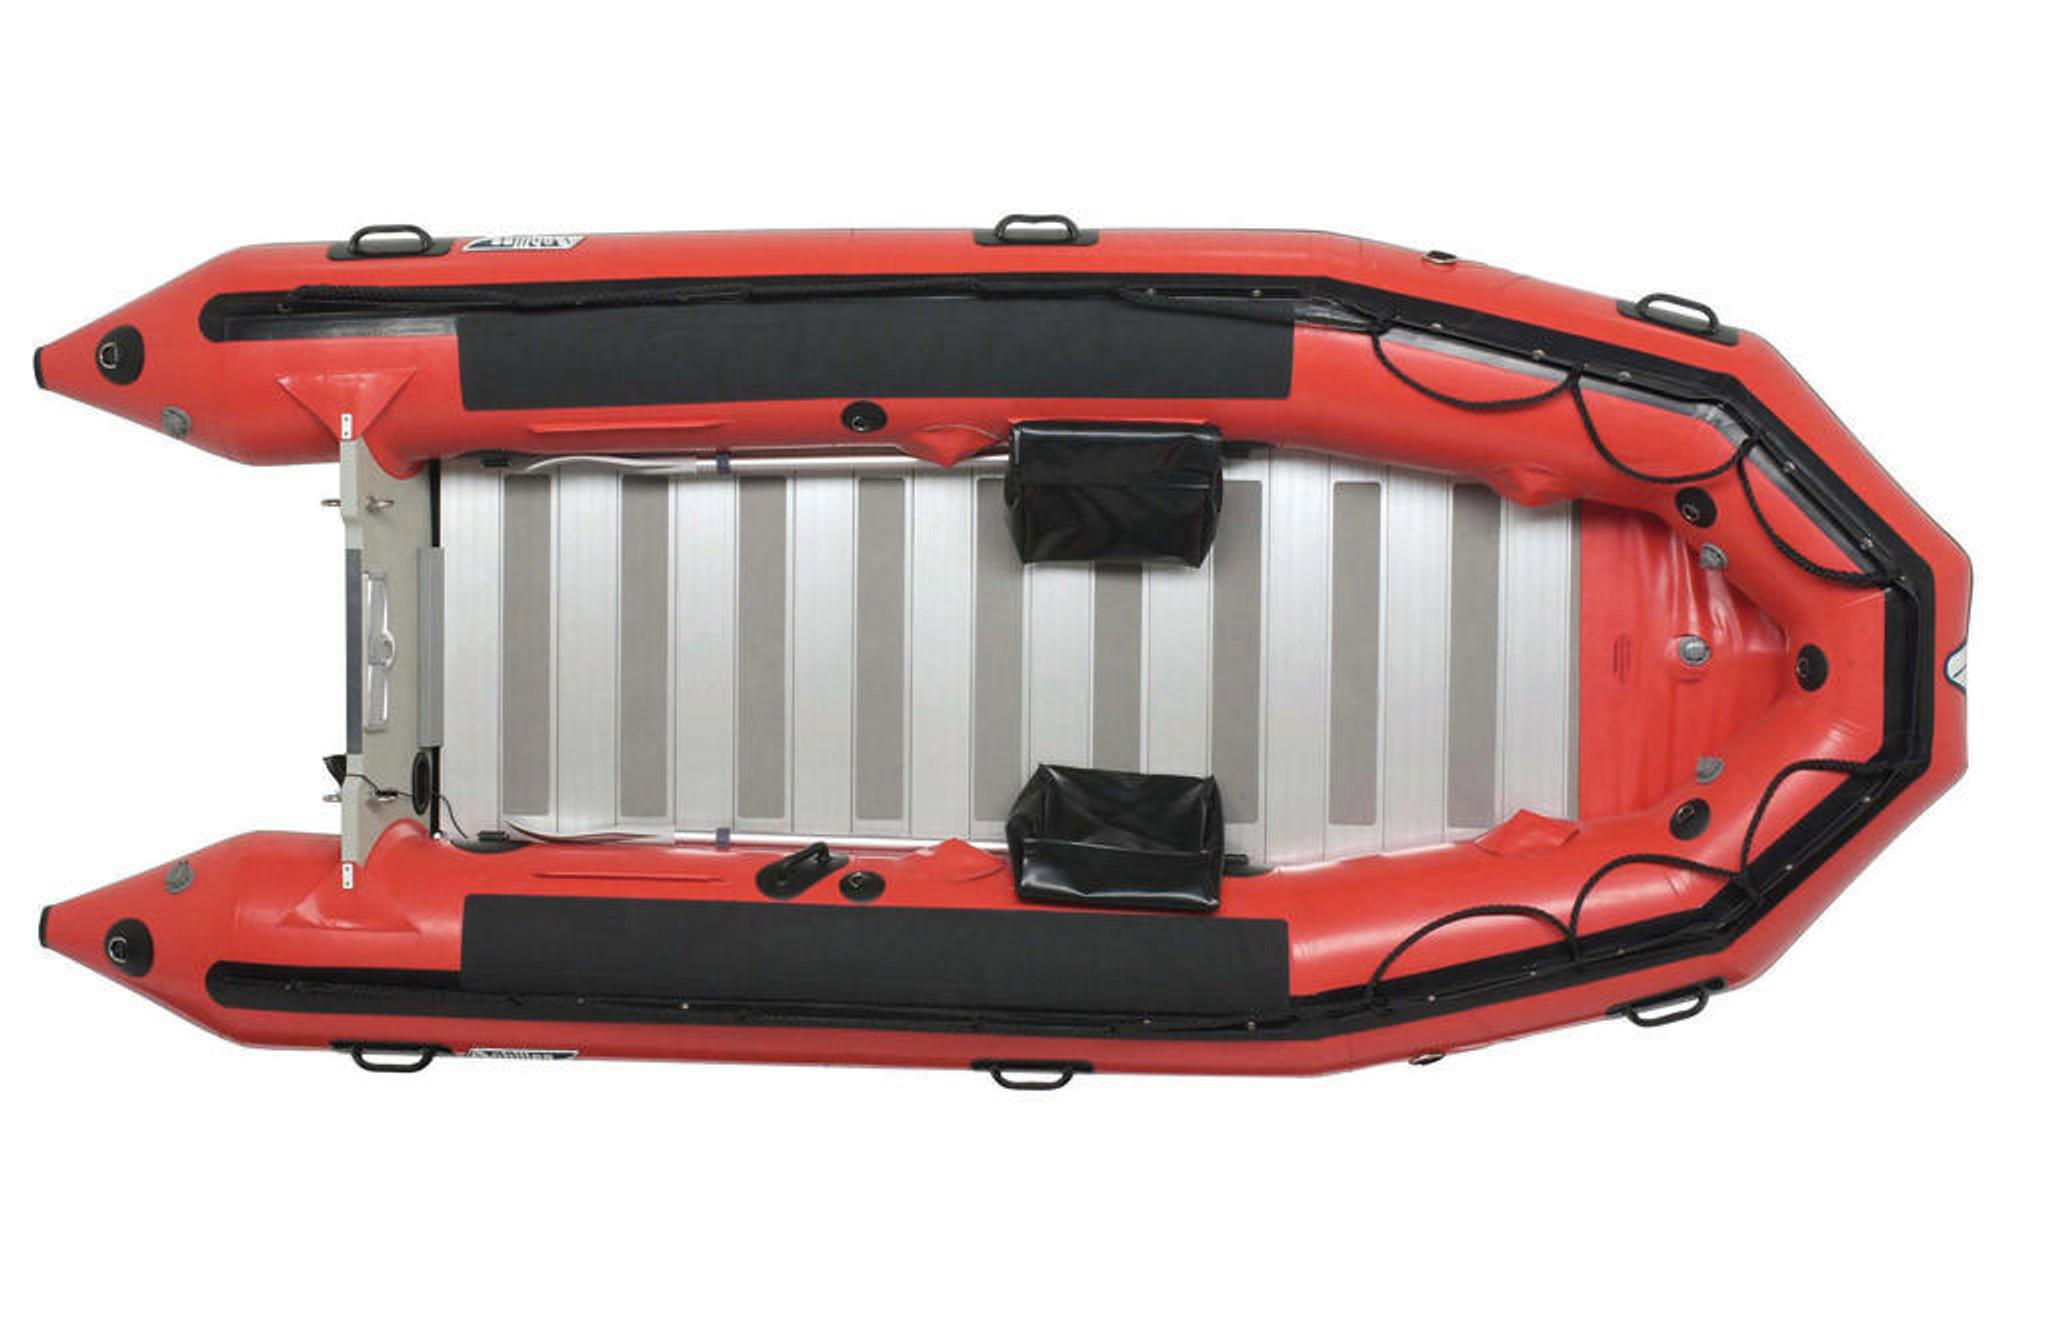 Buy Cheap Inflatable Fishing Boat Inflatable Rescue Boat For Sale